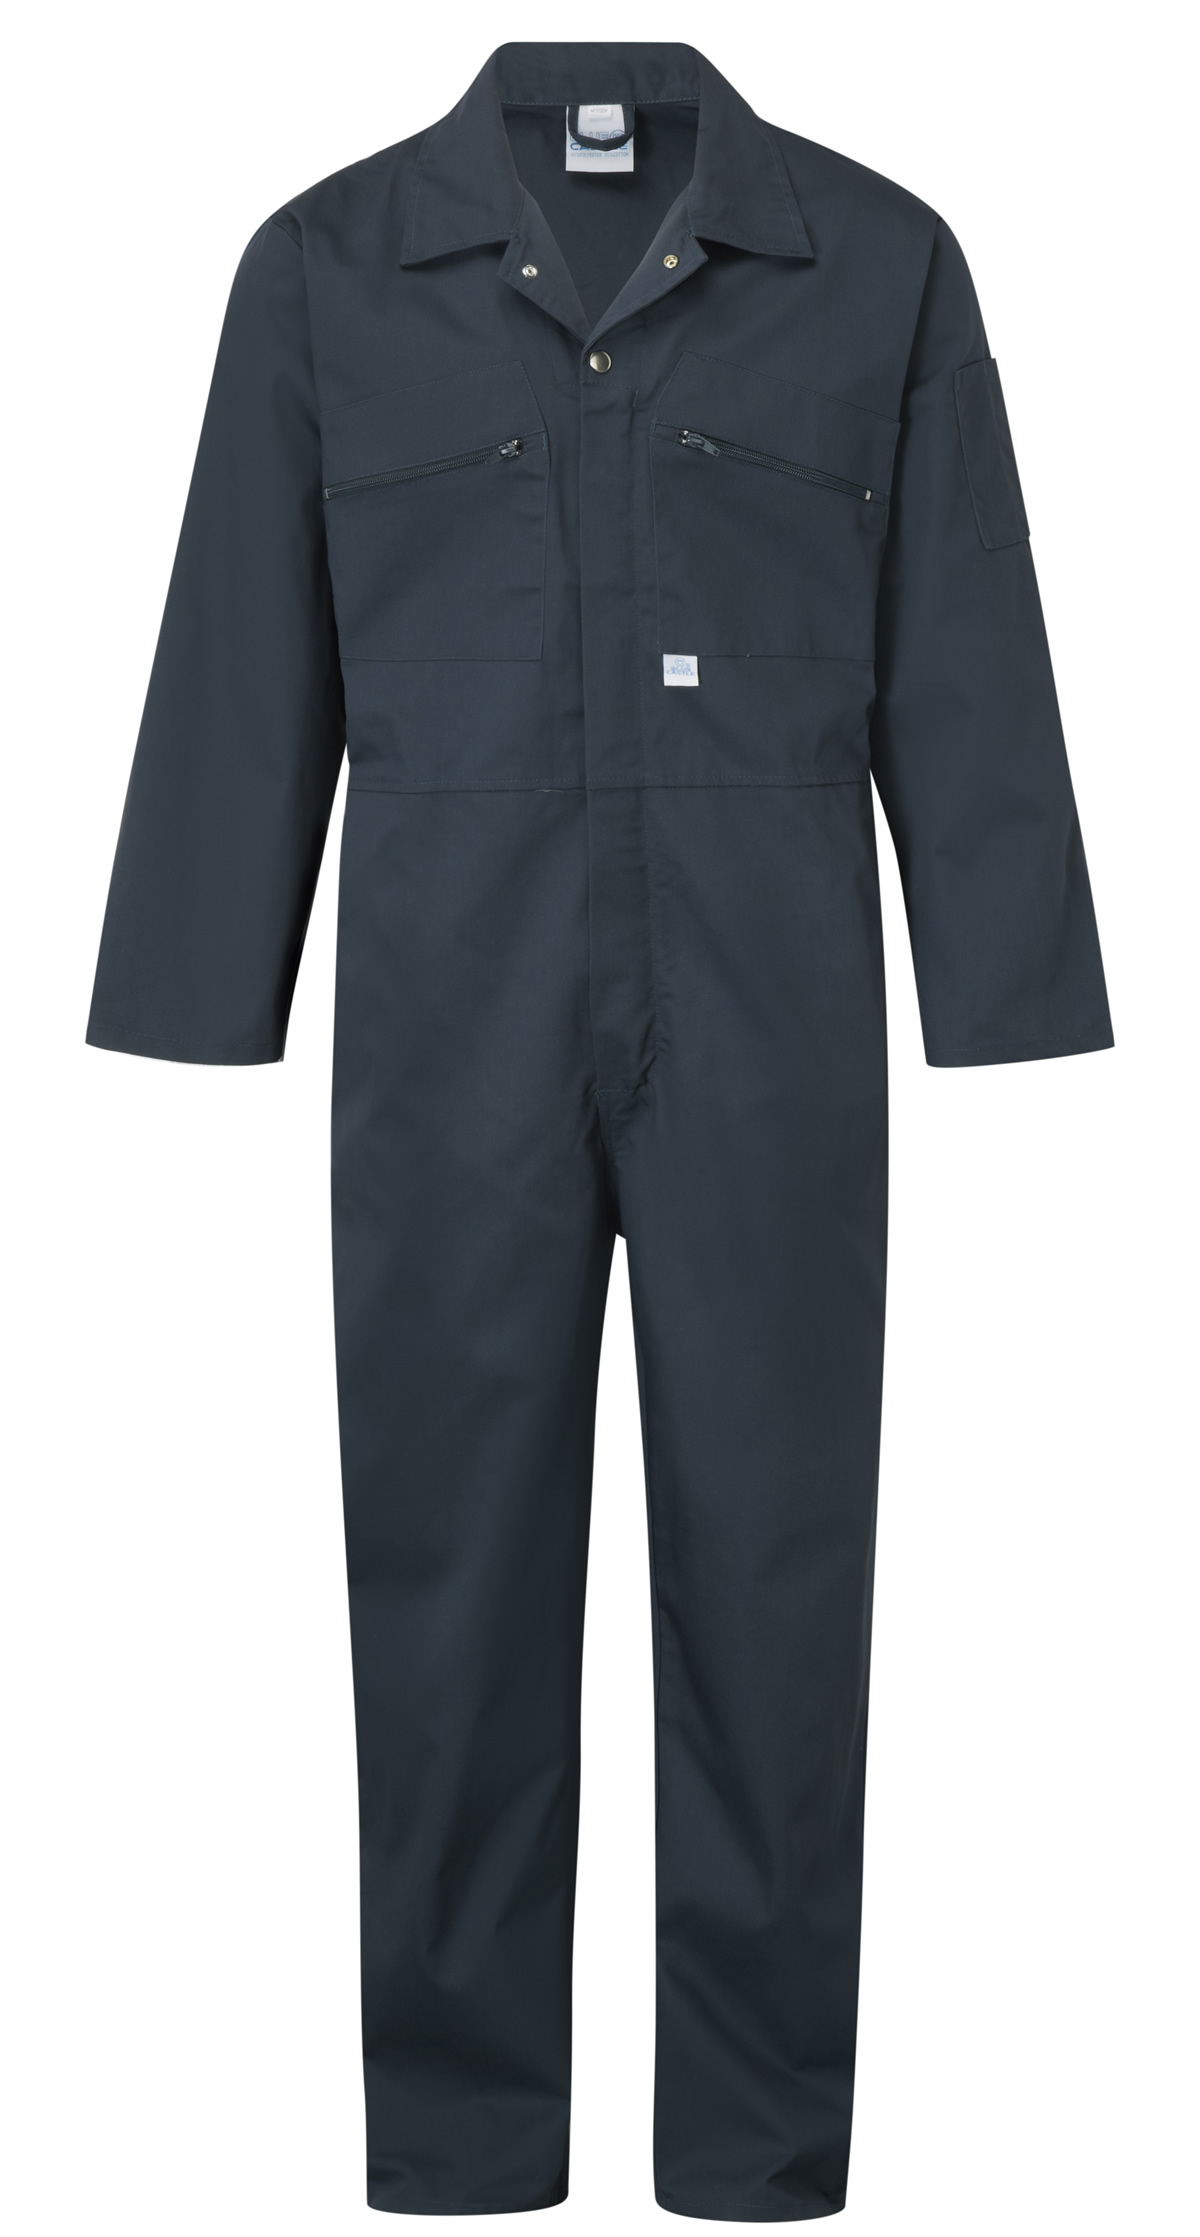 Poly/Cotton Work Overalls by Blue Castle